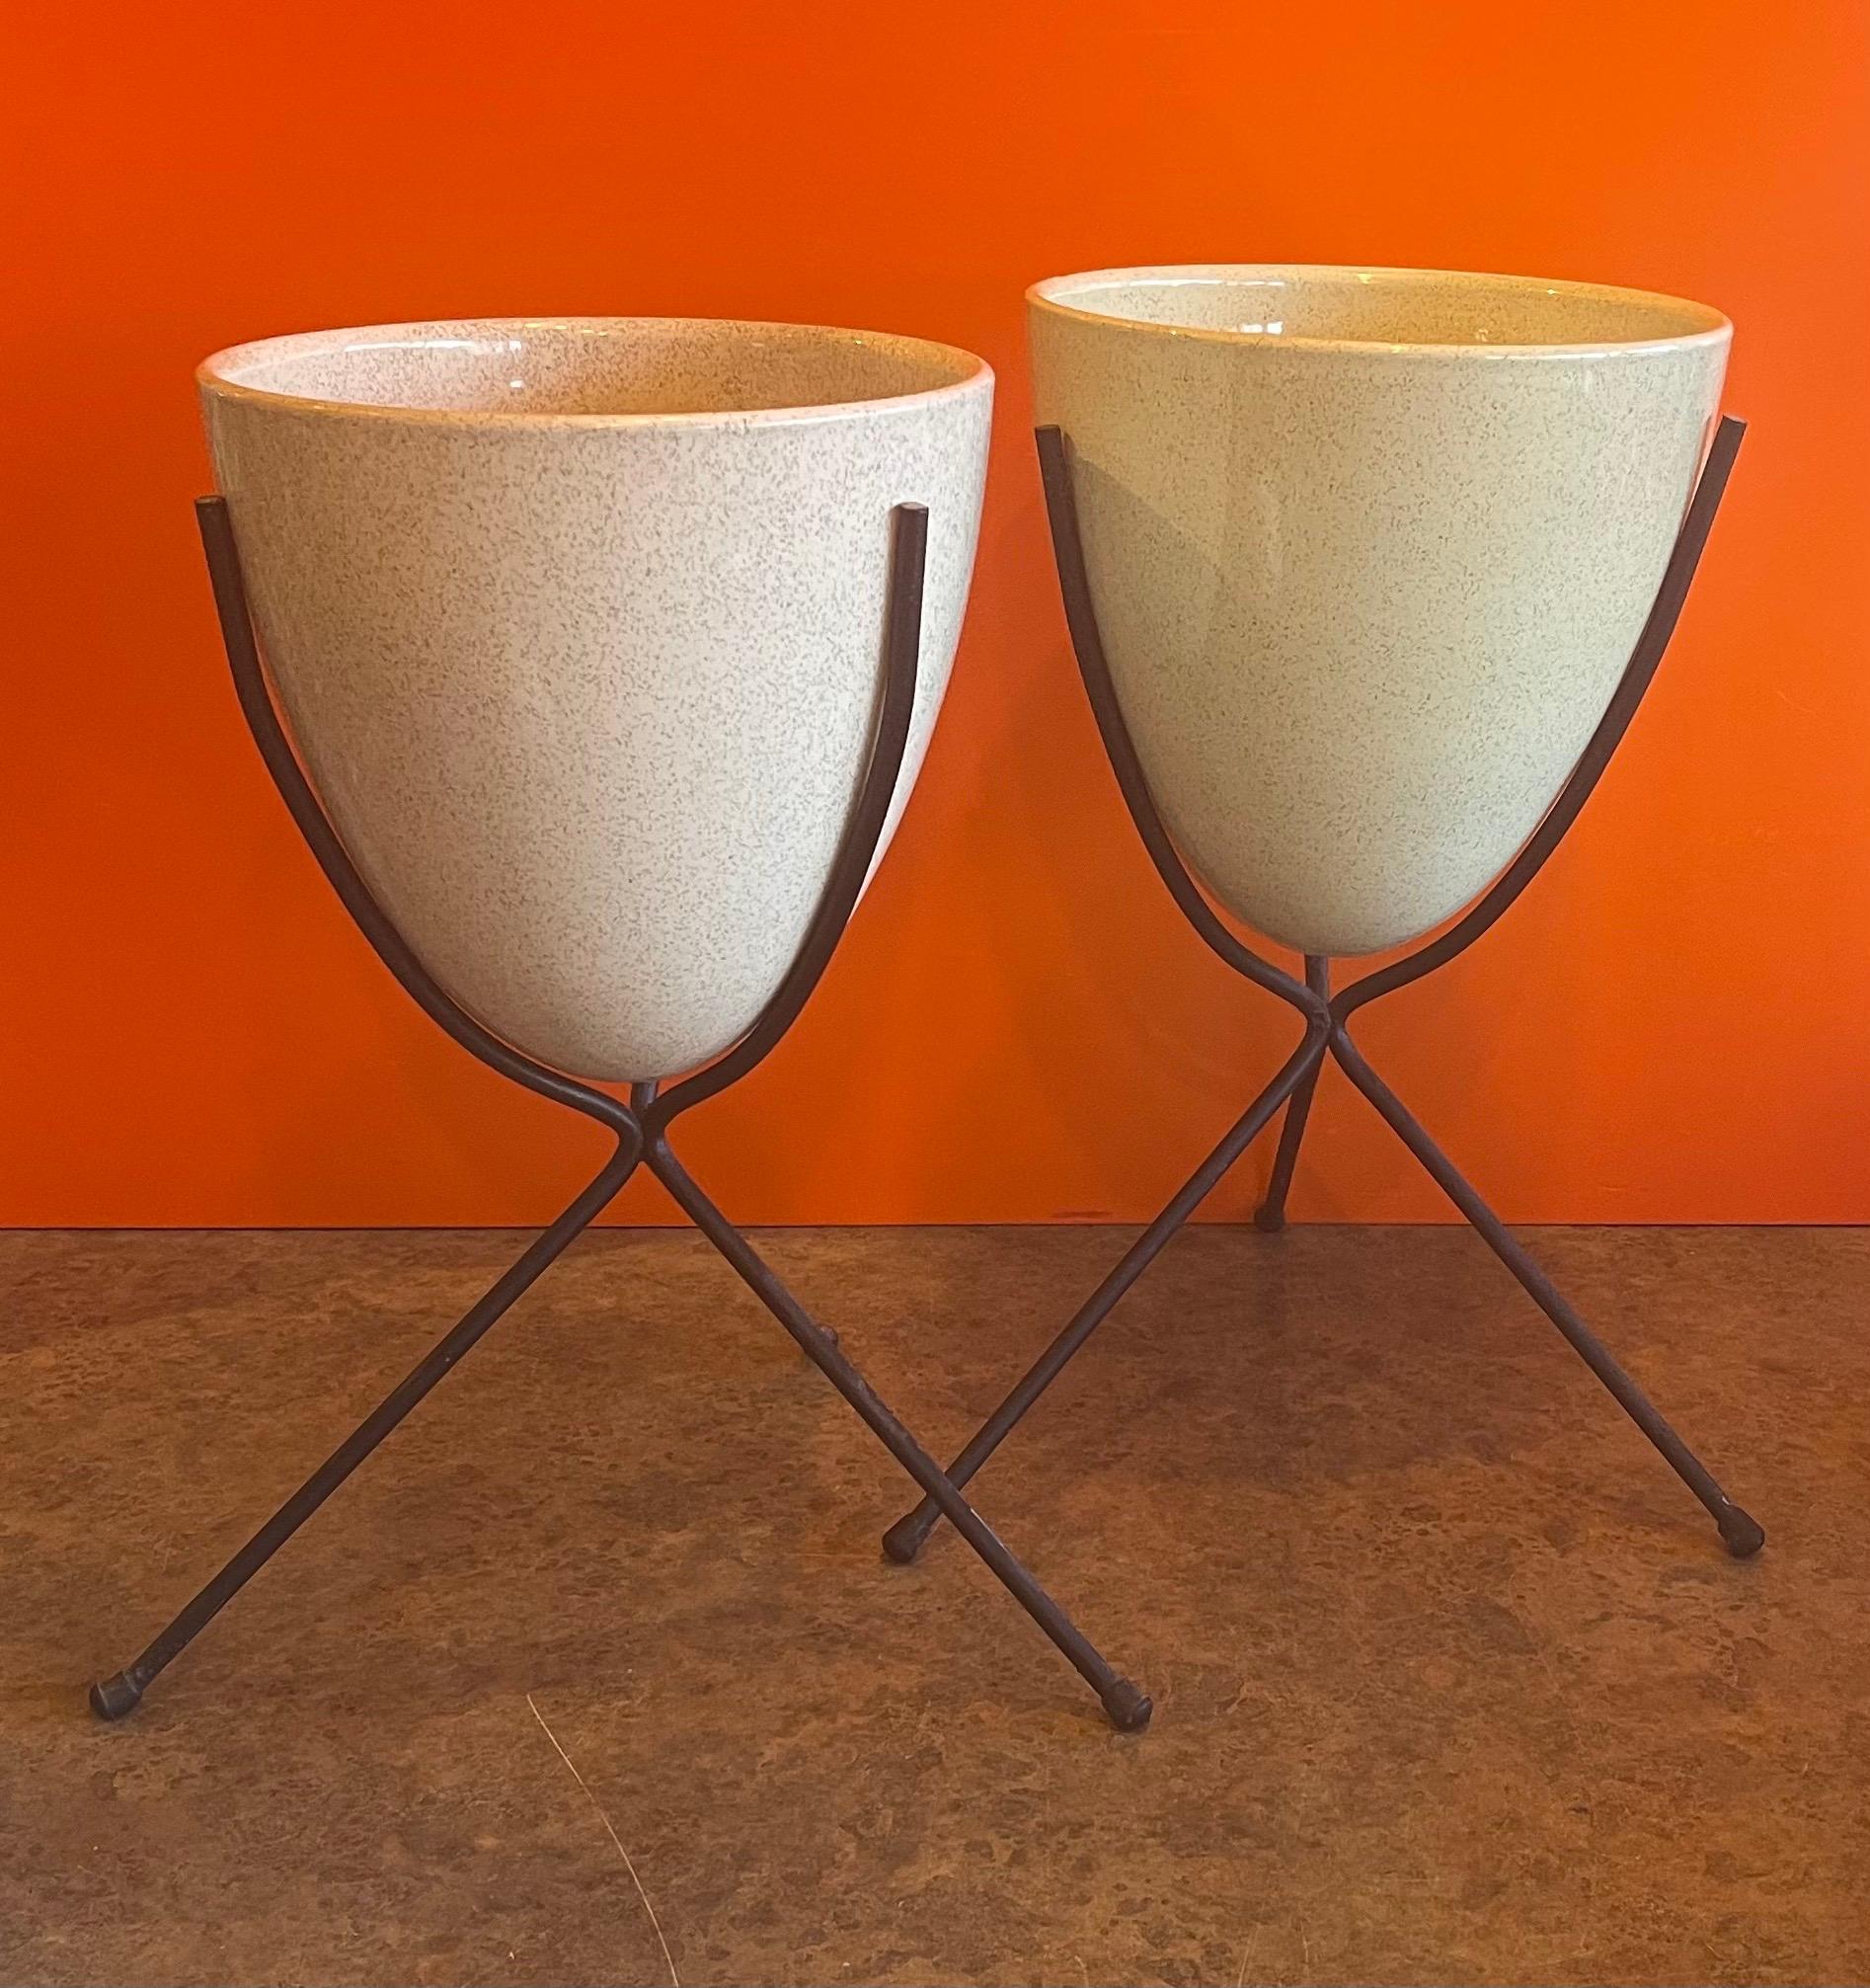 Rare pair of atomic age ceramic bullet planters with iron bases by Bauer, circa 1950's. The pair are in very good vintage condition with no chips or cracks (some oxidation on the inside from dirt). Both planters have a 